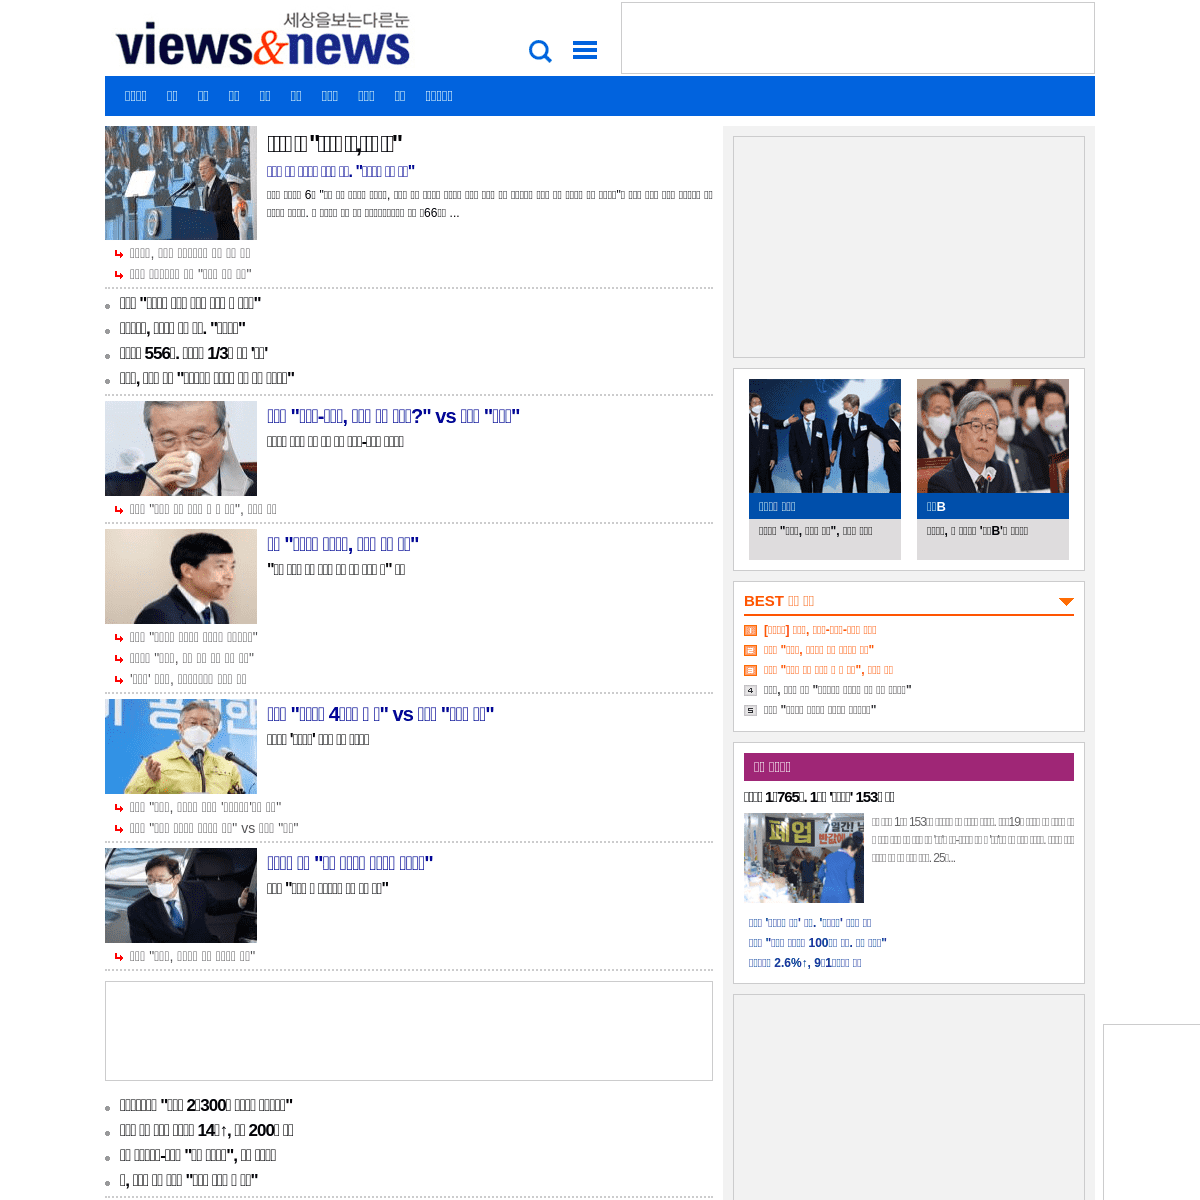 A complete backup of https://viewsnnews.com